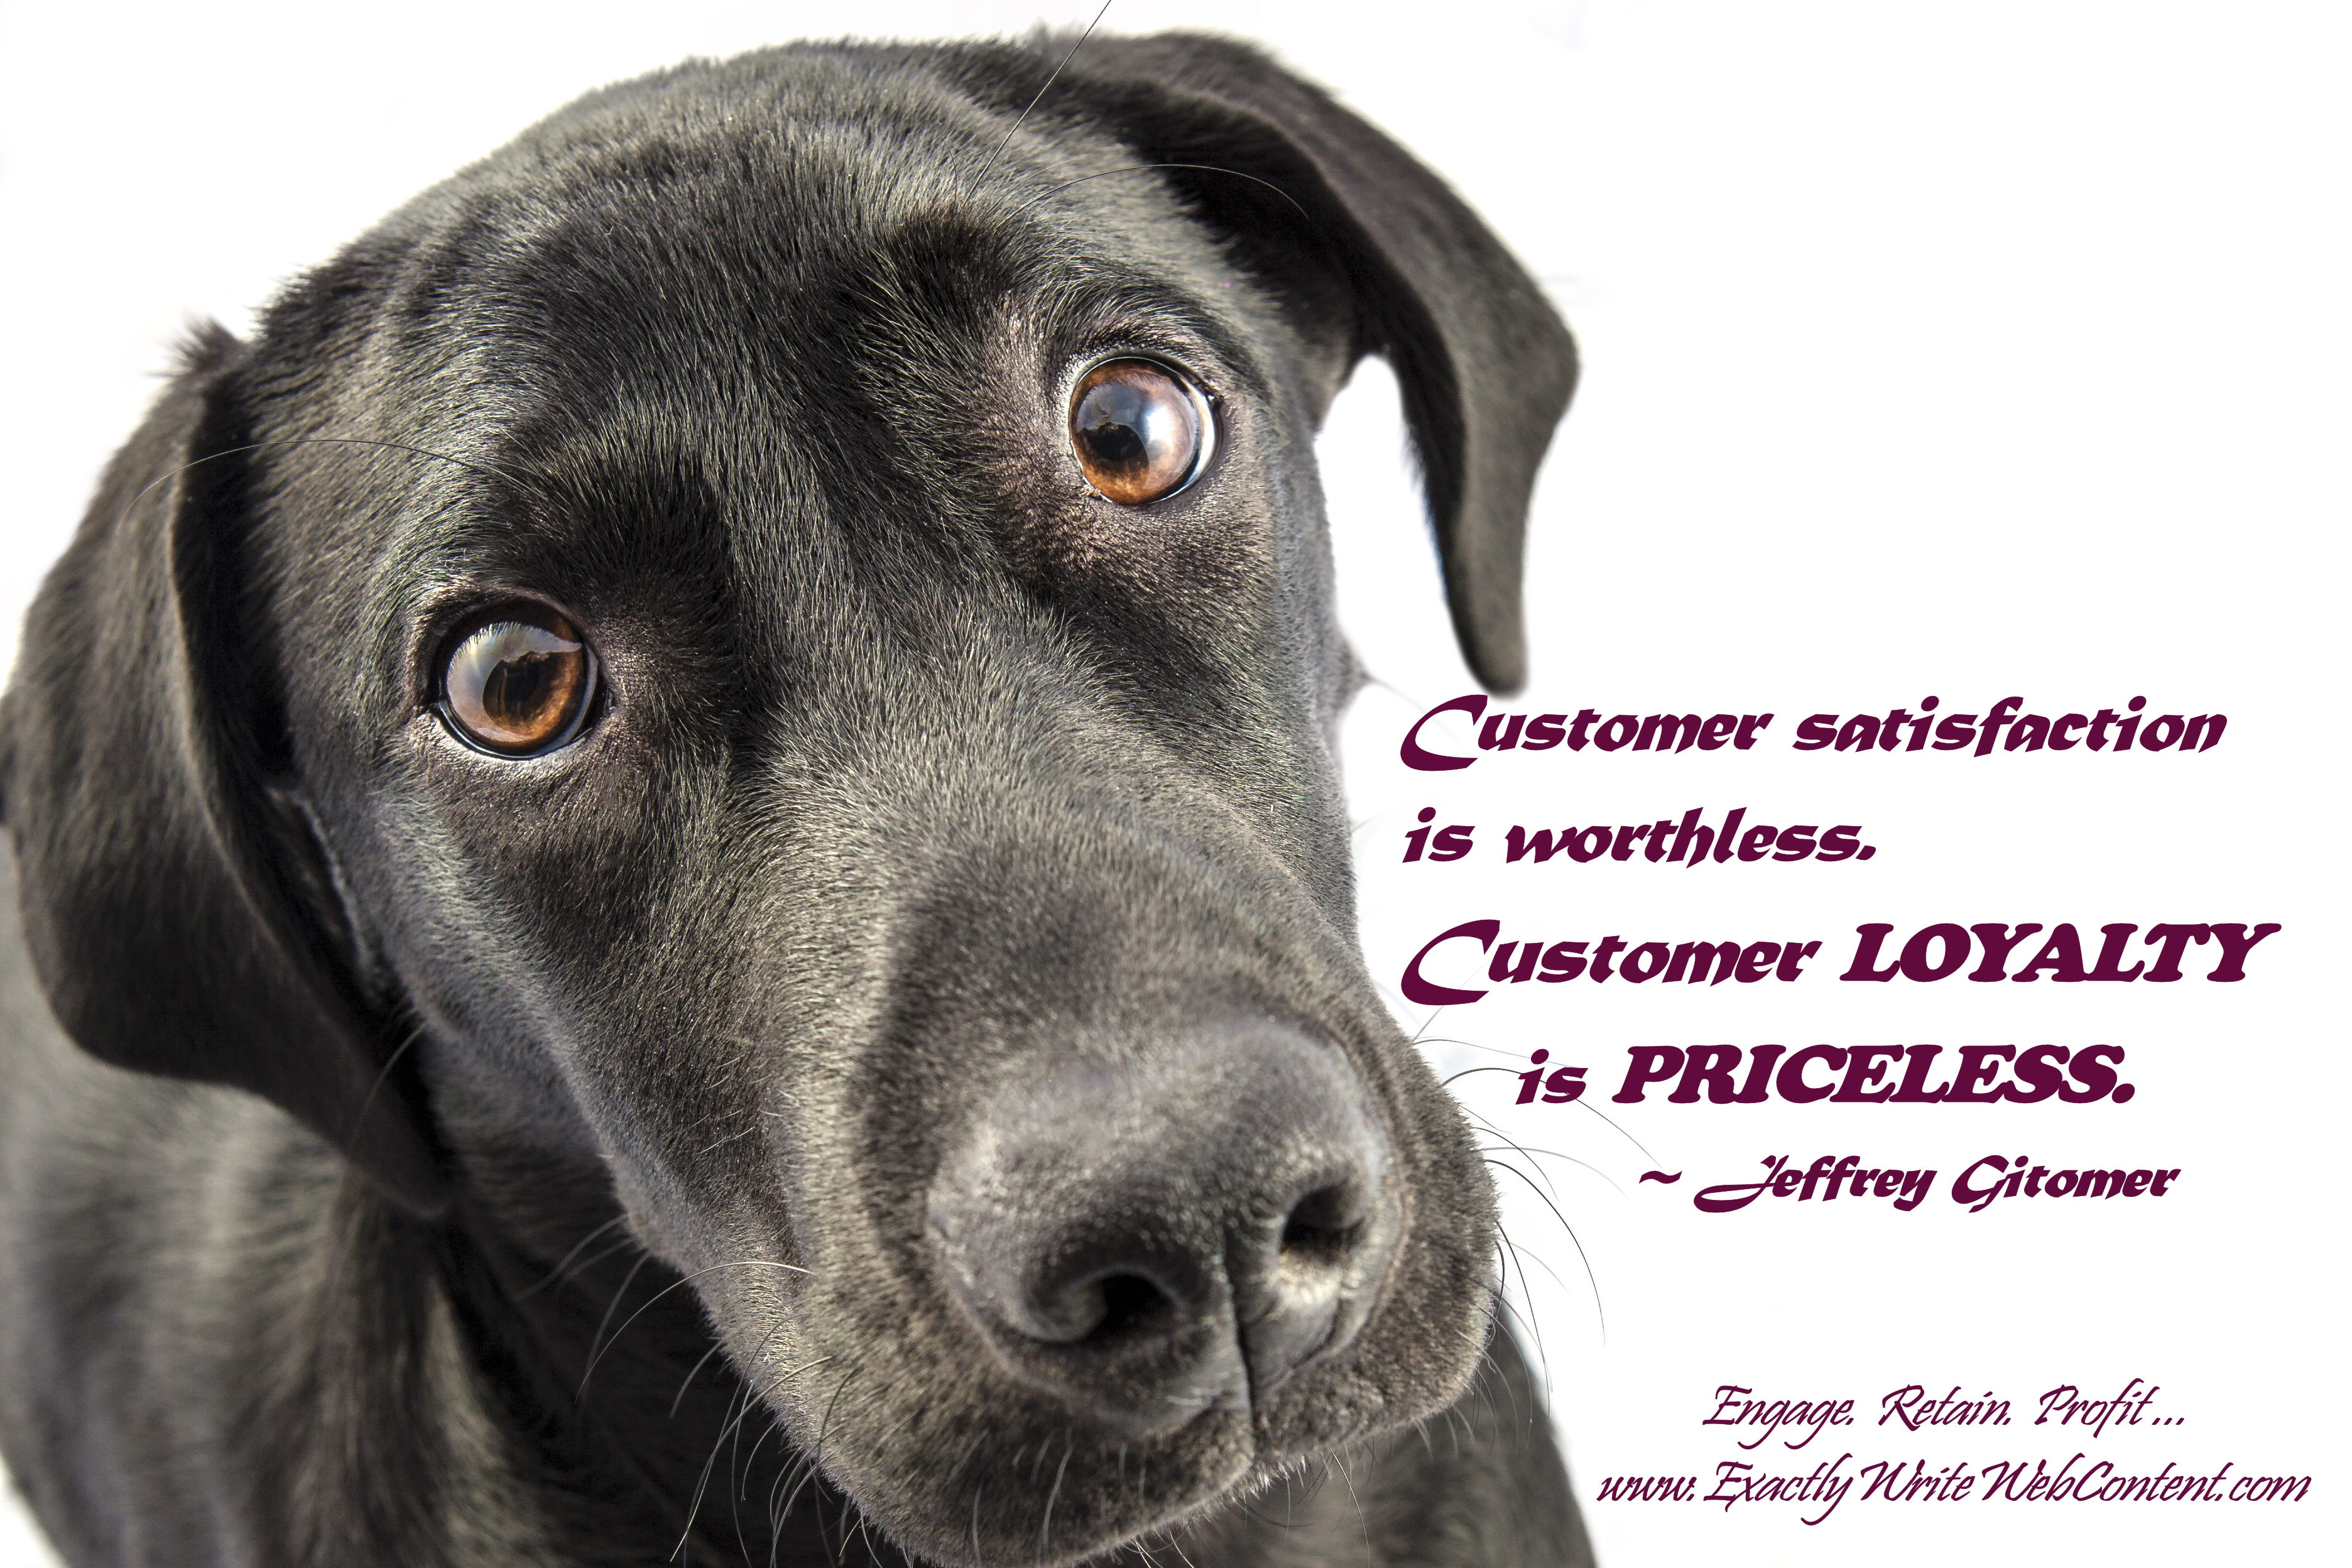 Customer Loyalty is Priceless